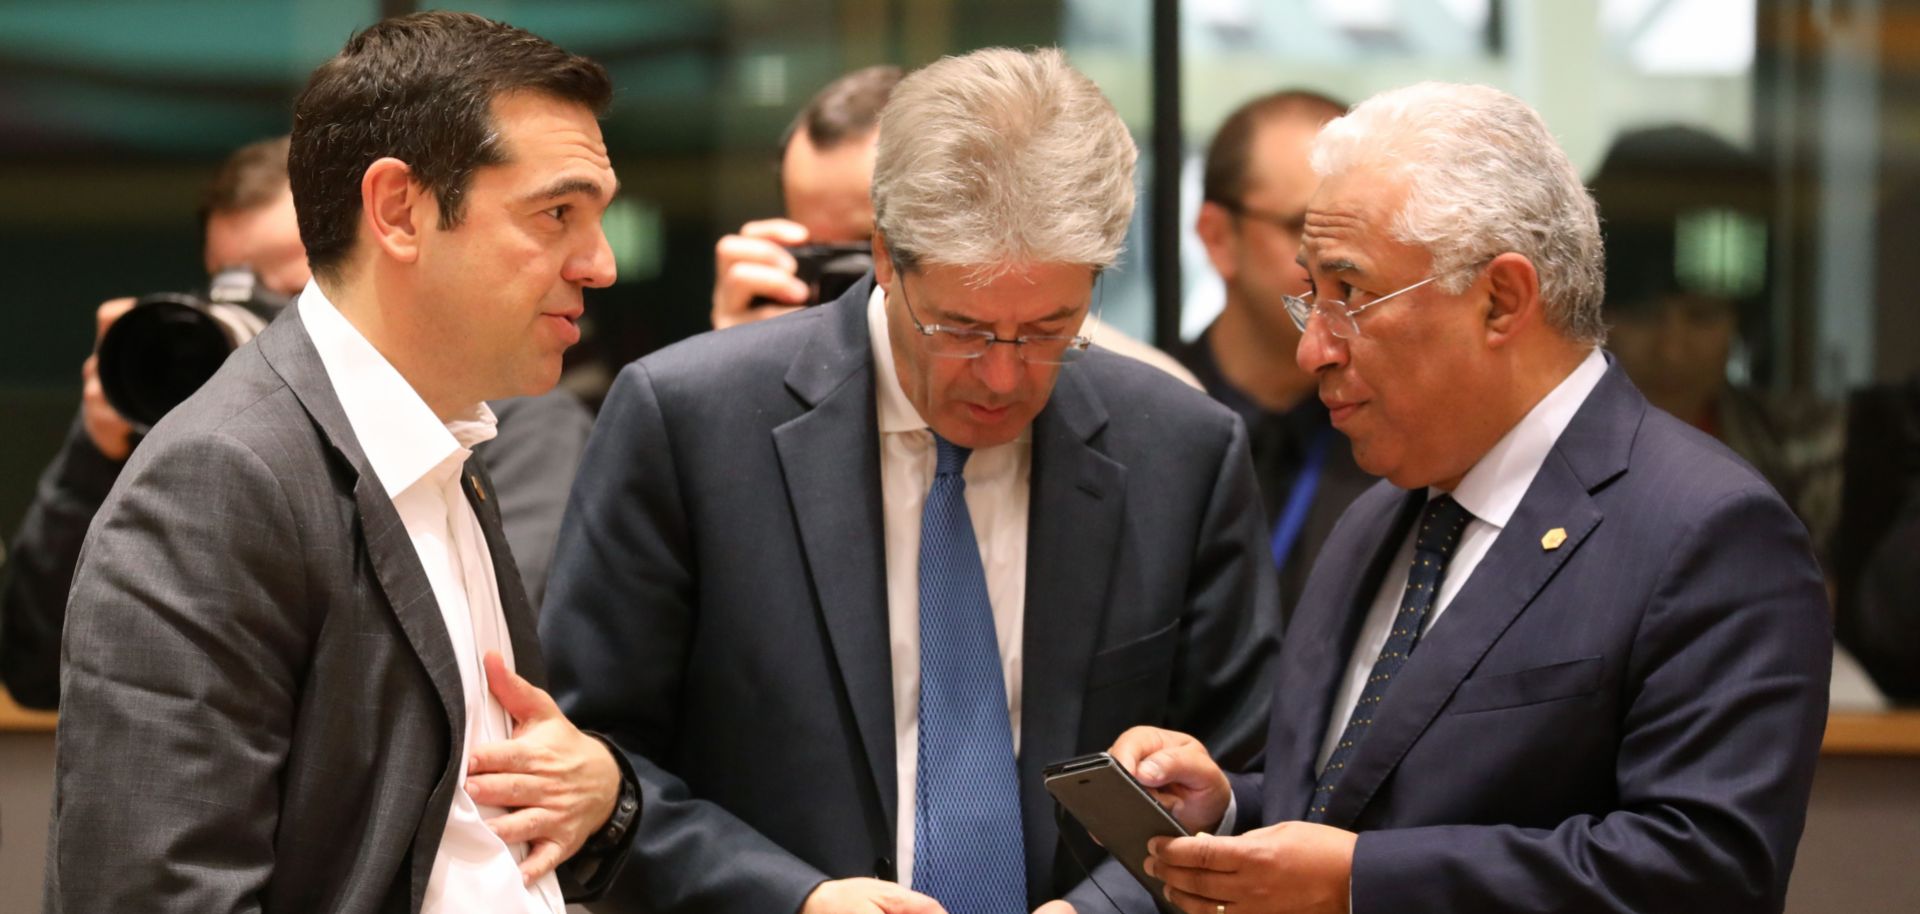 In this photo, Greece's Prime Minister Alexis Tsipras speaks with Italy's Prime Minister Paolo Gentiloni and Portugal's Prime Minister Antonio Costa during a summit of European Union leaders in Brussels during March 2018.